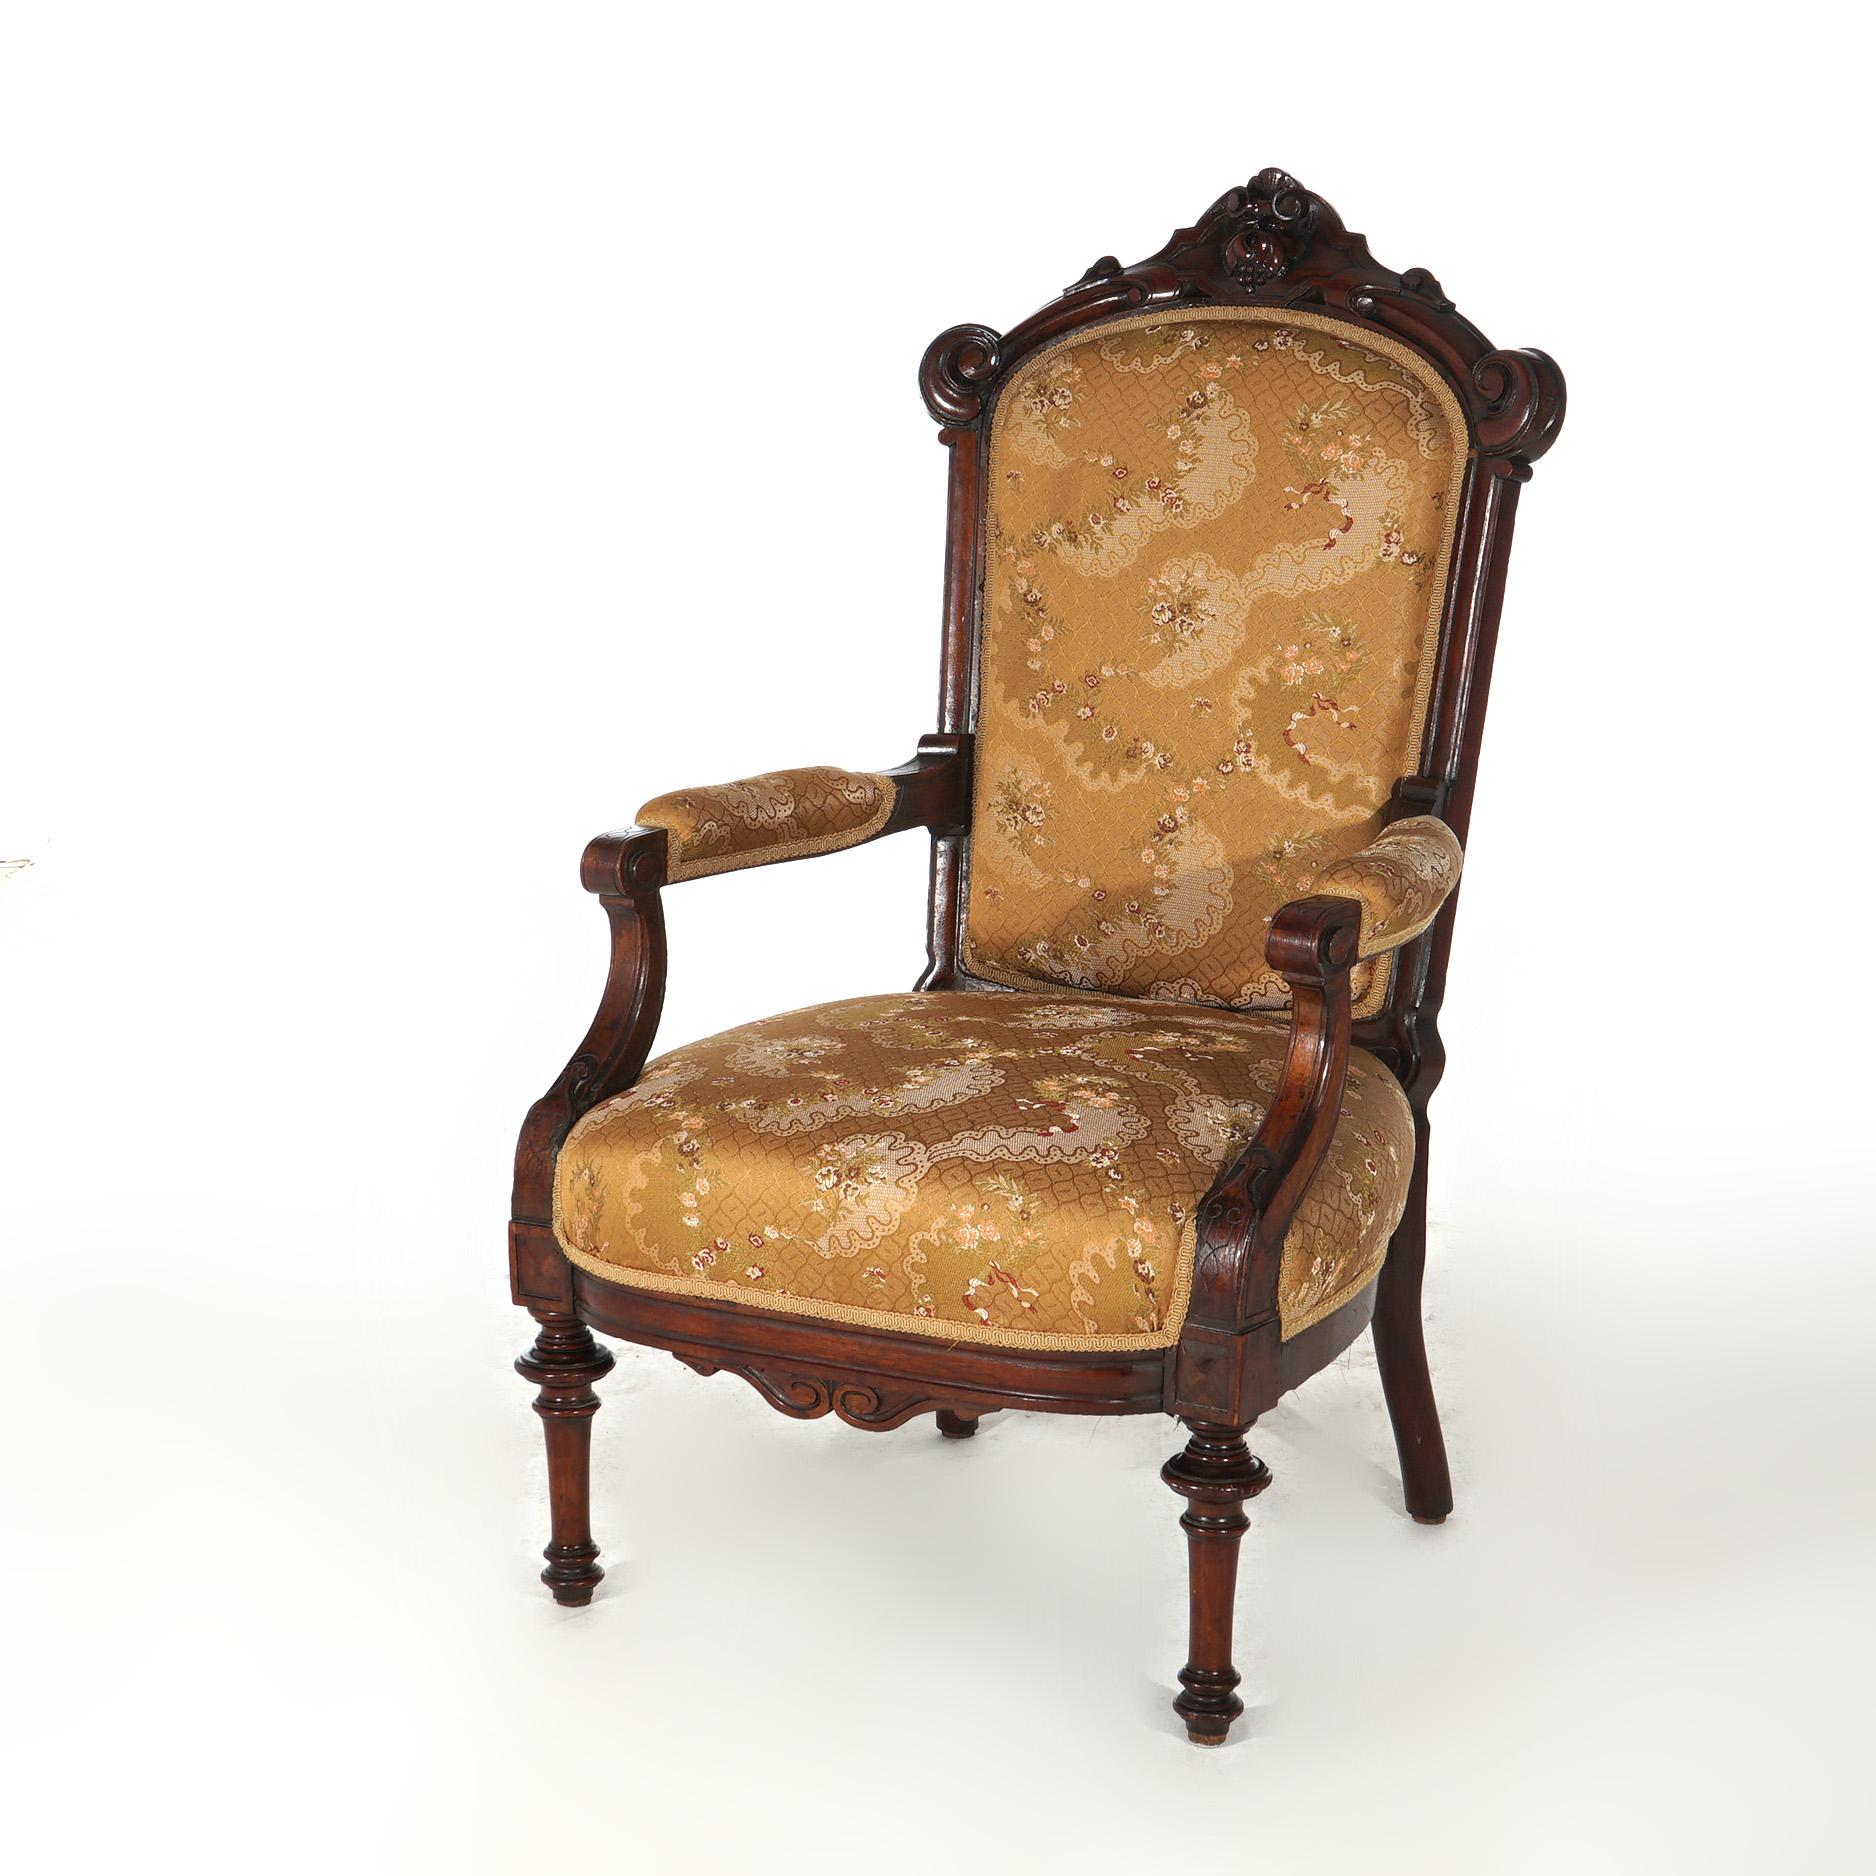 ***Ask About Reduced In-House Delivery Rates - Reliable Professional Service & Fully Insured***

Antique Victorian Carved Walnut Upholstered Gentleman’s Chair with Arched Crest, Covered Arms and Balustrade Legs, C1890

Measures - 42.5